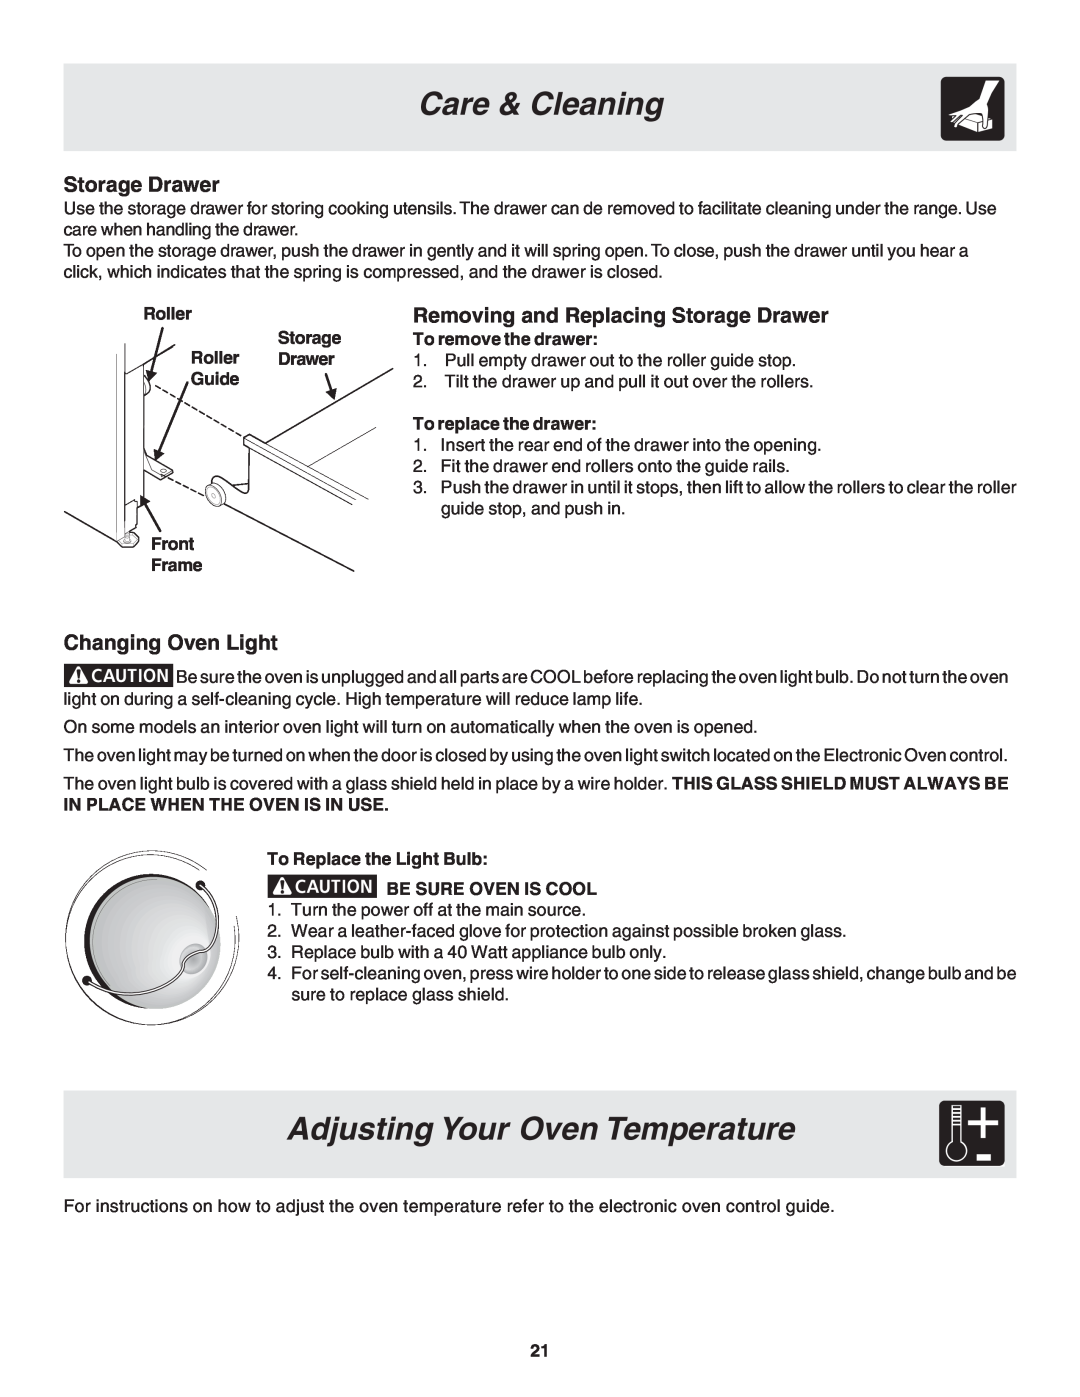 Frigidaire 318200879 manual Adjusting Your Oven Temperature, Care & Cleaning, Storage Drawer, Changing Oven Light 